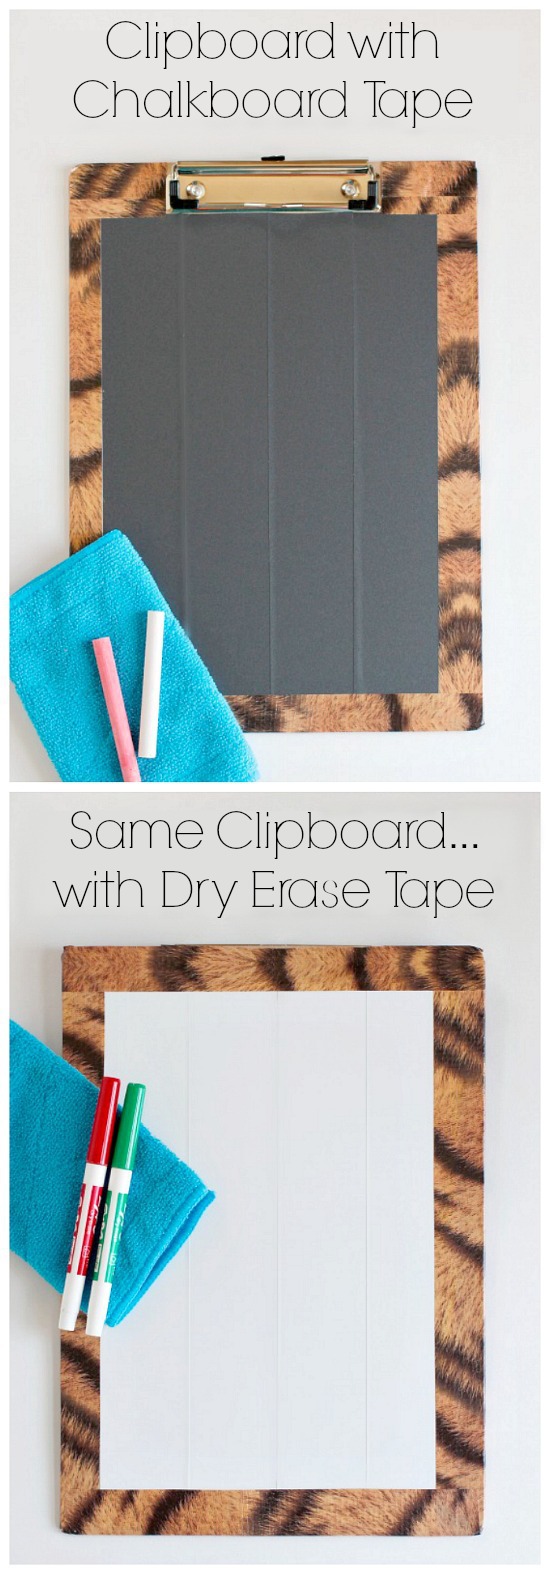 DIY Double-Sided Clipboard with Chalkboard and Dry Erase Tape